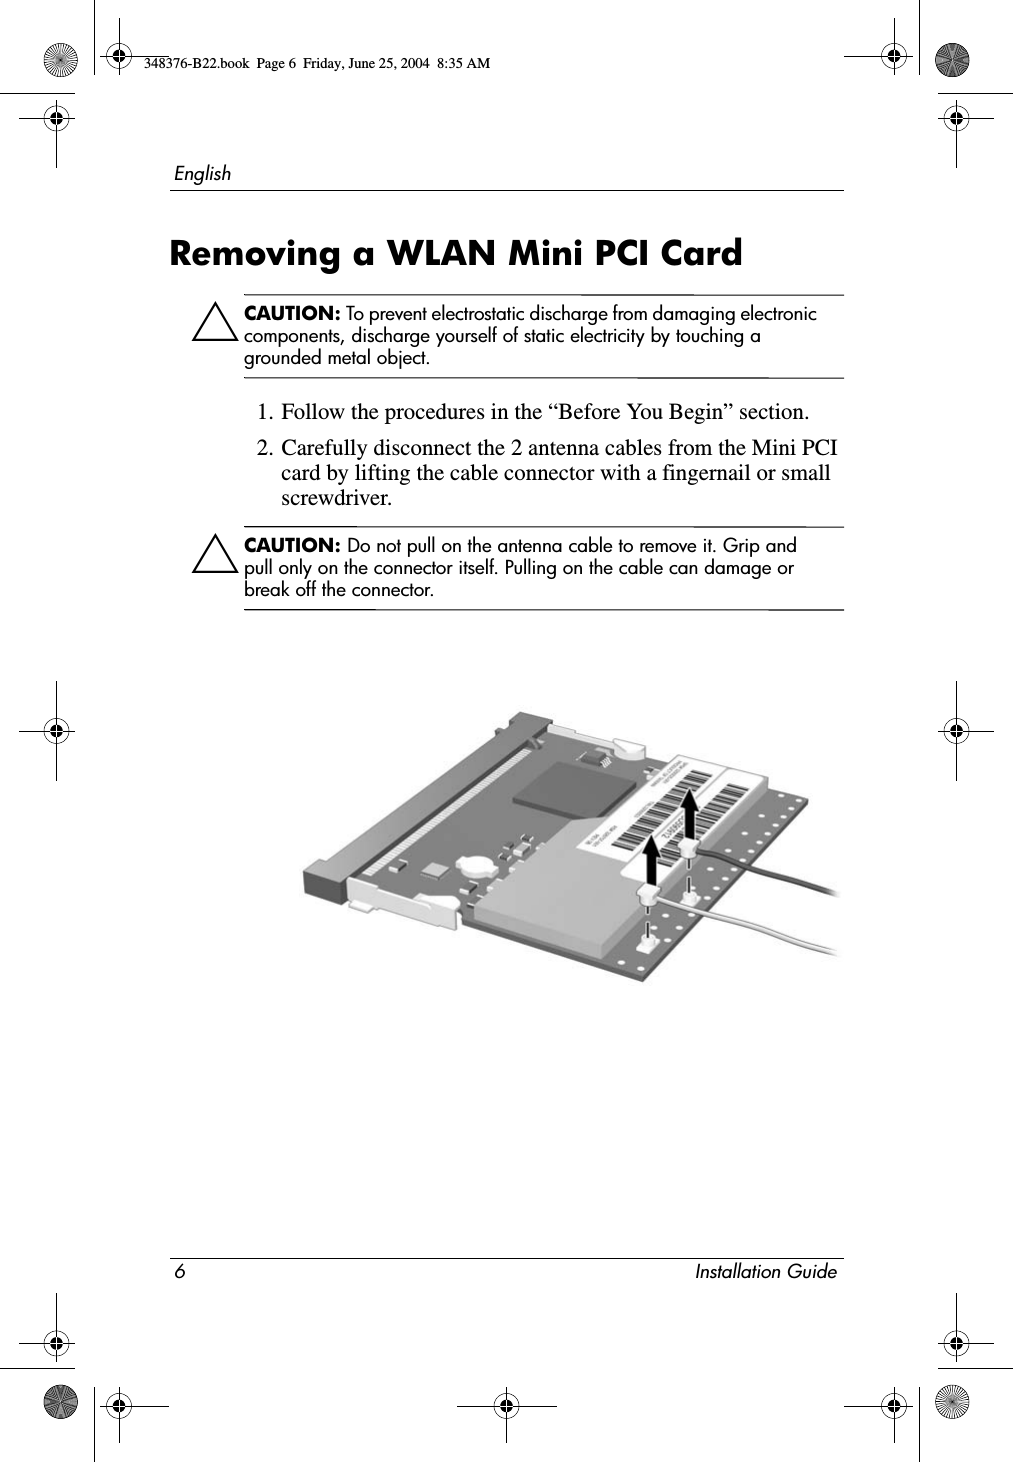 6 Installation GuideEnglishRemoving a WLAN Mini PCI CardÄCAUTION: To prevent electrostatic discharge from damaging electronic components, discharge yourself of static electricity by touching a grounded metal object.1. Follow the procedures in the “Before You Begin” section.2. Carefully disconnect the 2 antenna cables from the Mini PCI card by lifting the cable connector with a fingernail or small screwdriver.ÄCAUTION: Do not pull on the antenna cable to remove it. Grip and pull only on the connector itself. Pulling on the cable can damage or break off the connector.348376-B22.book  Page 6  Friday, June 25, 2004  8:35 AM